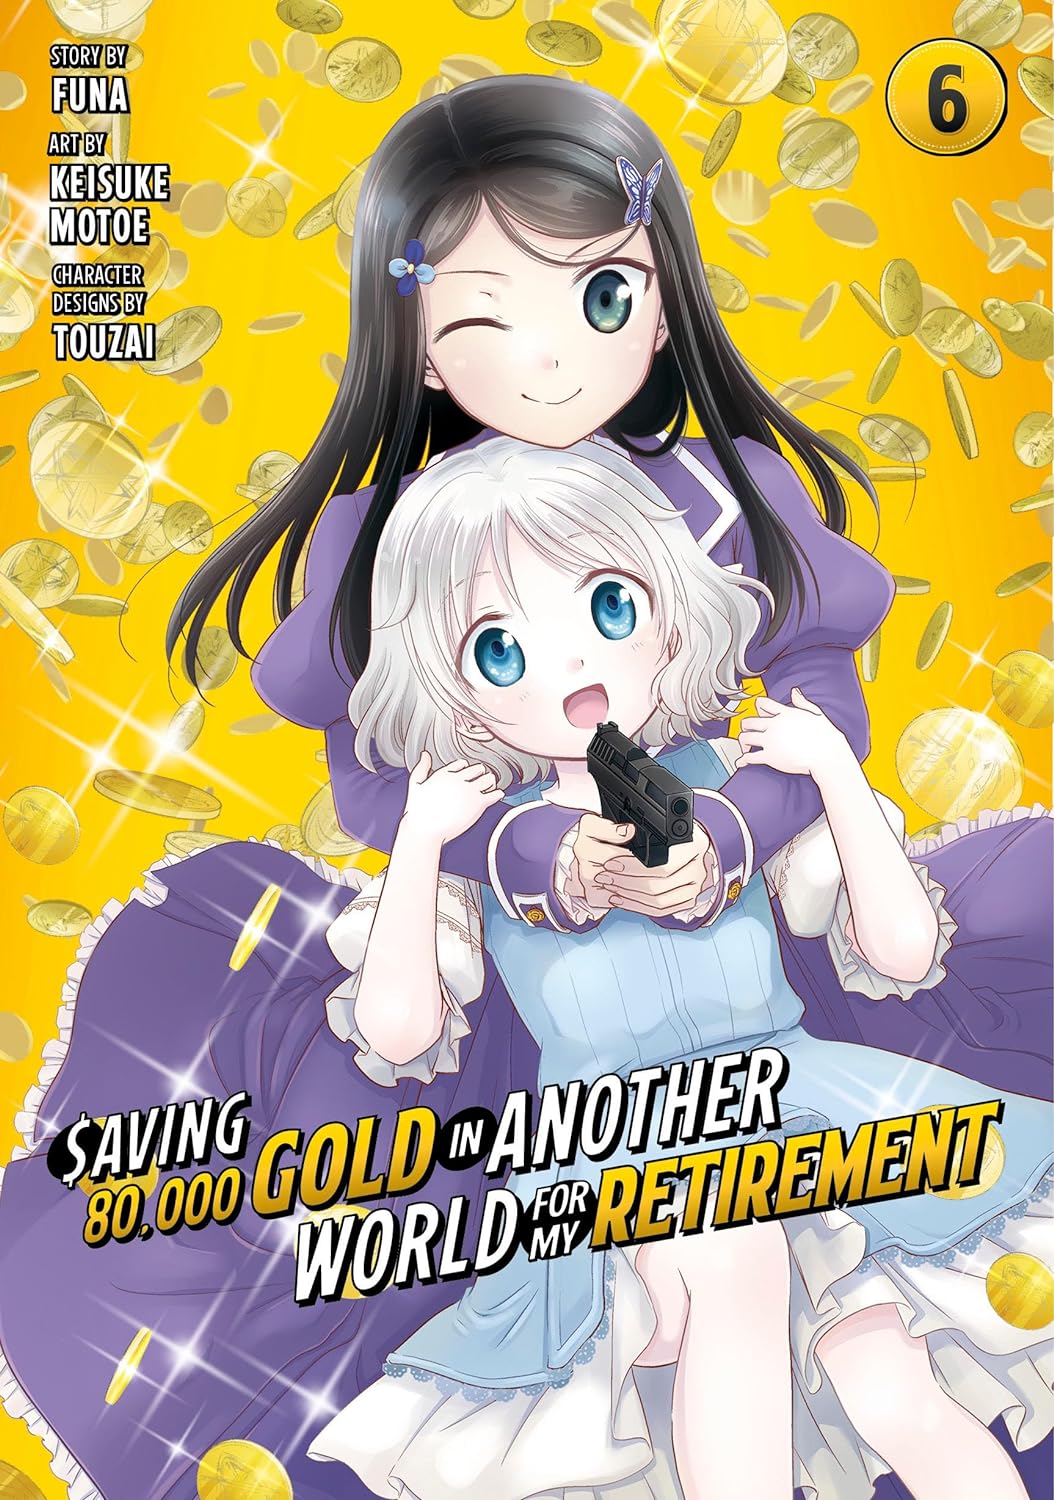 Saving 80,000 Gold in Another World for My Retirement (Manga) Vol. 06